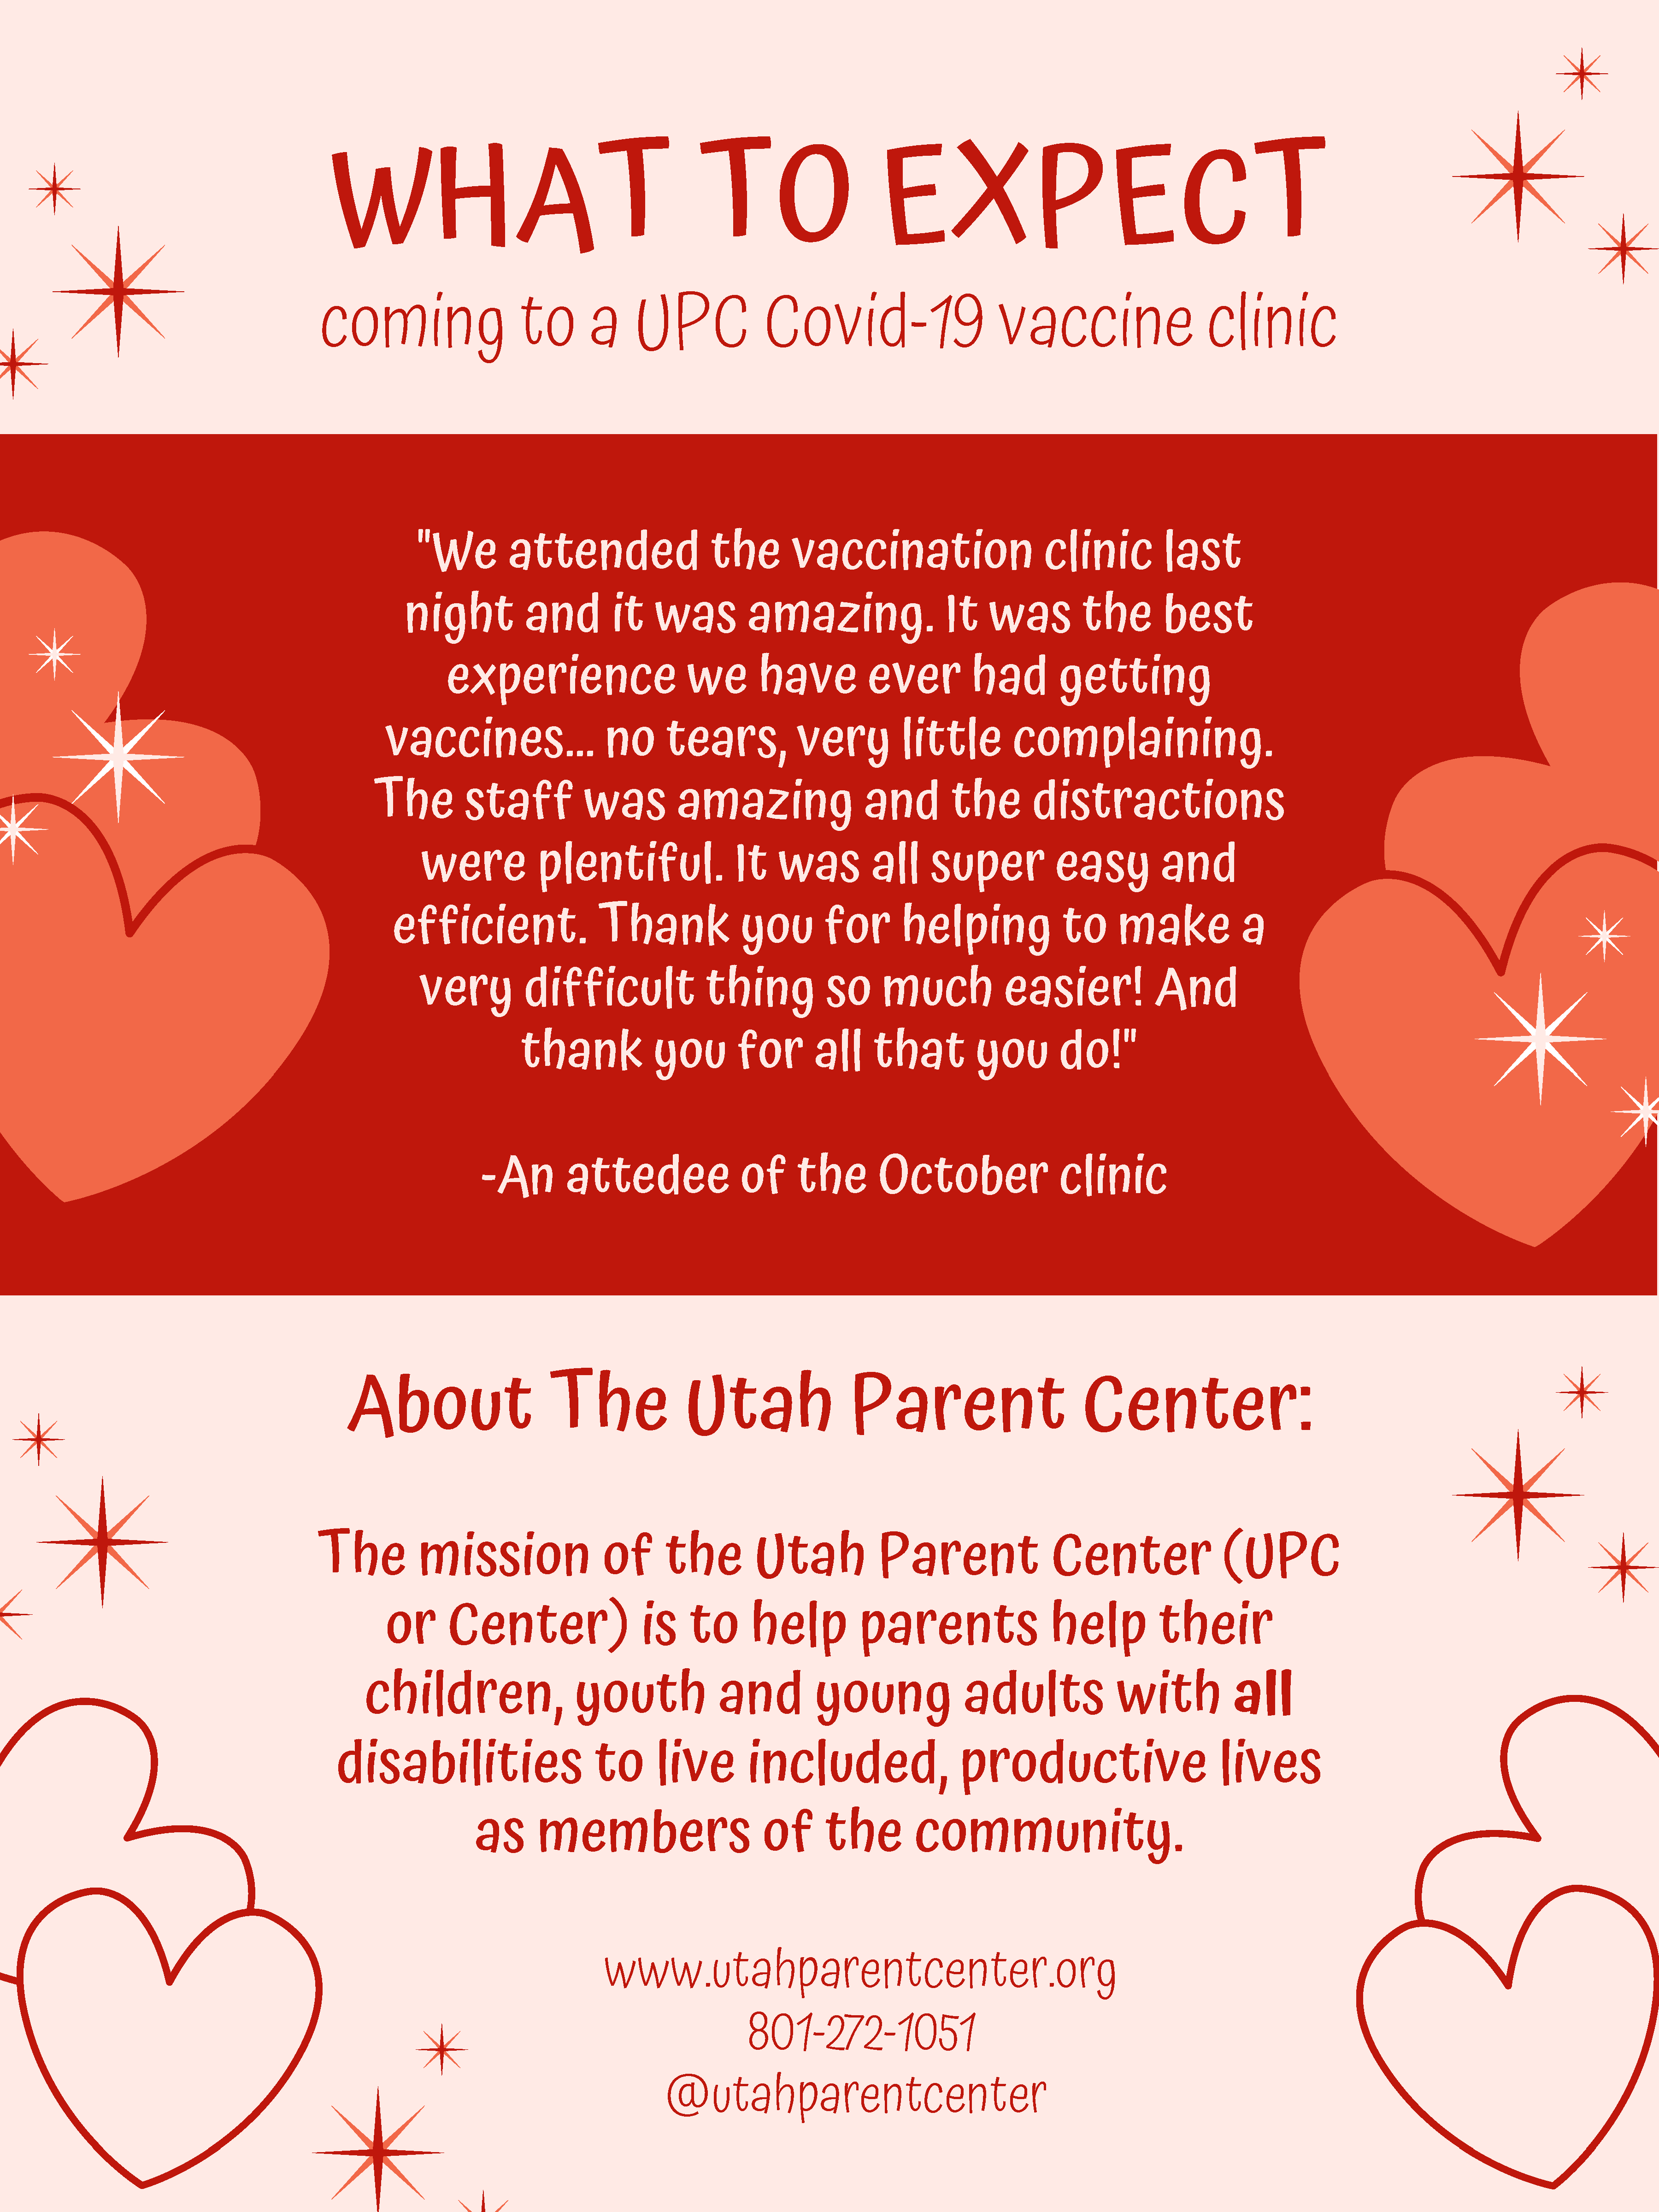 What to expect coming to a UPC Covid-19 vaccine clinic